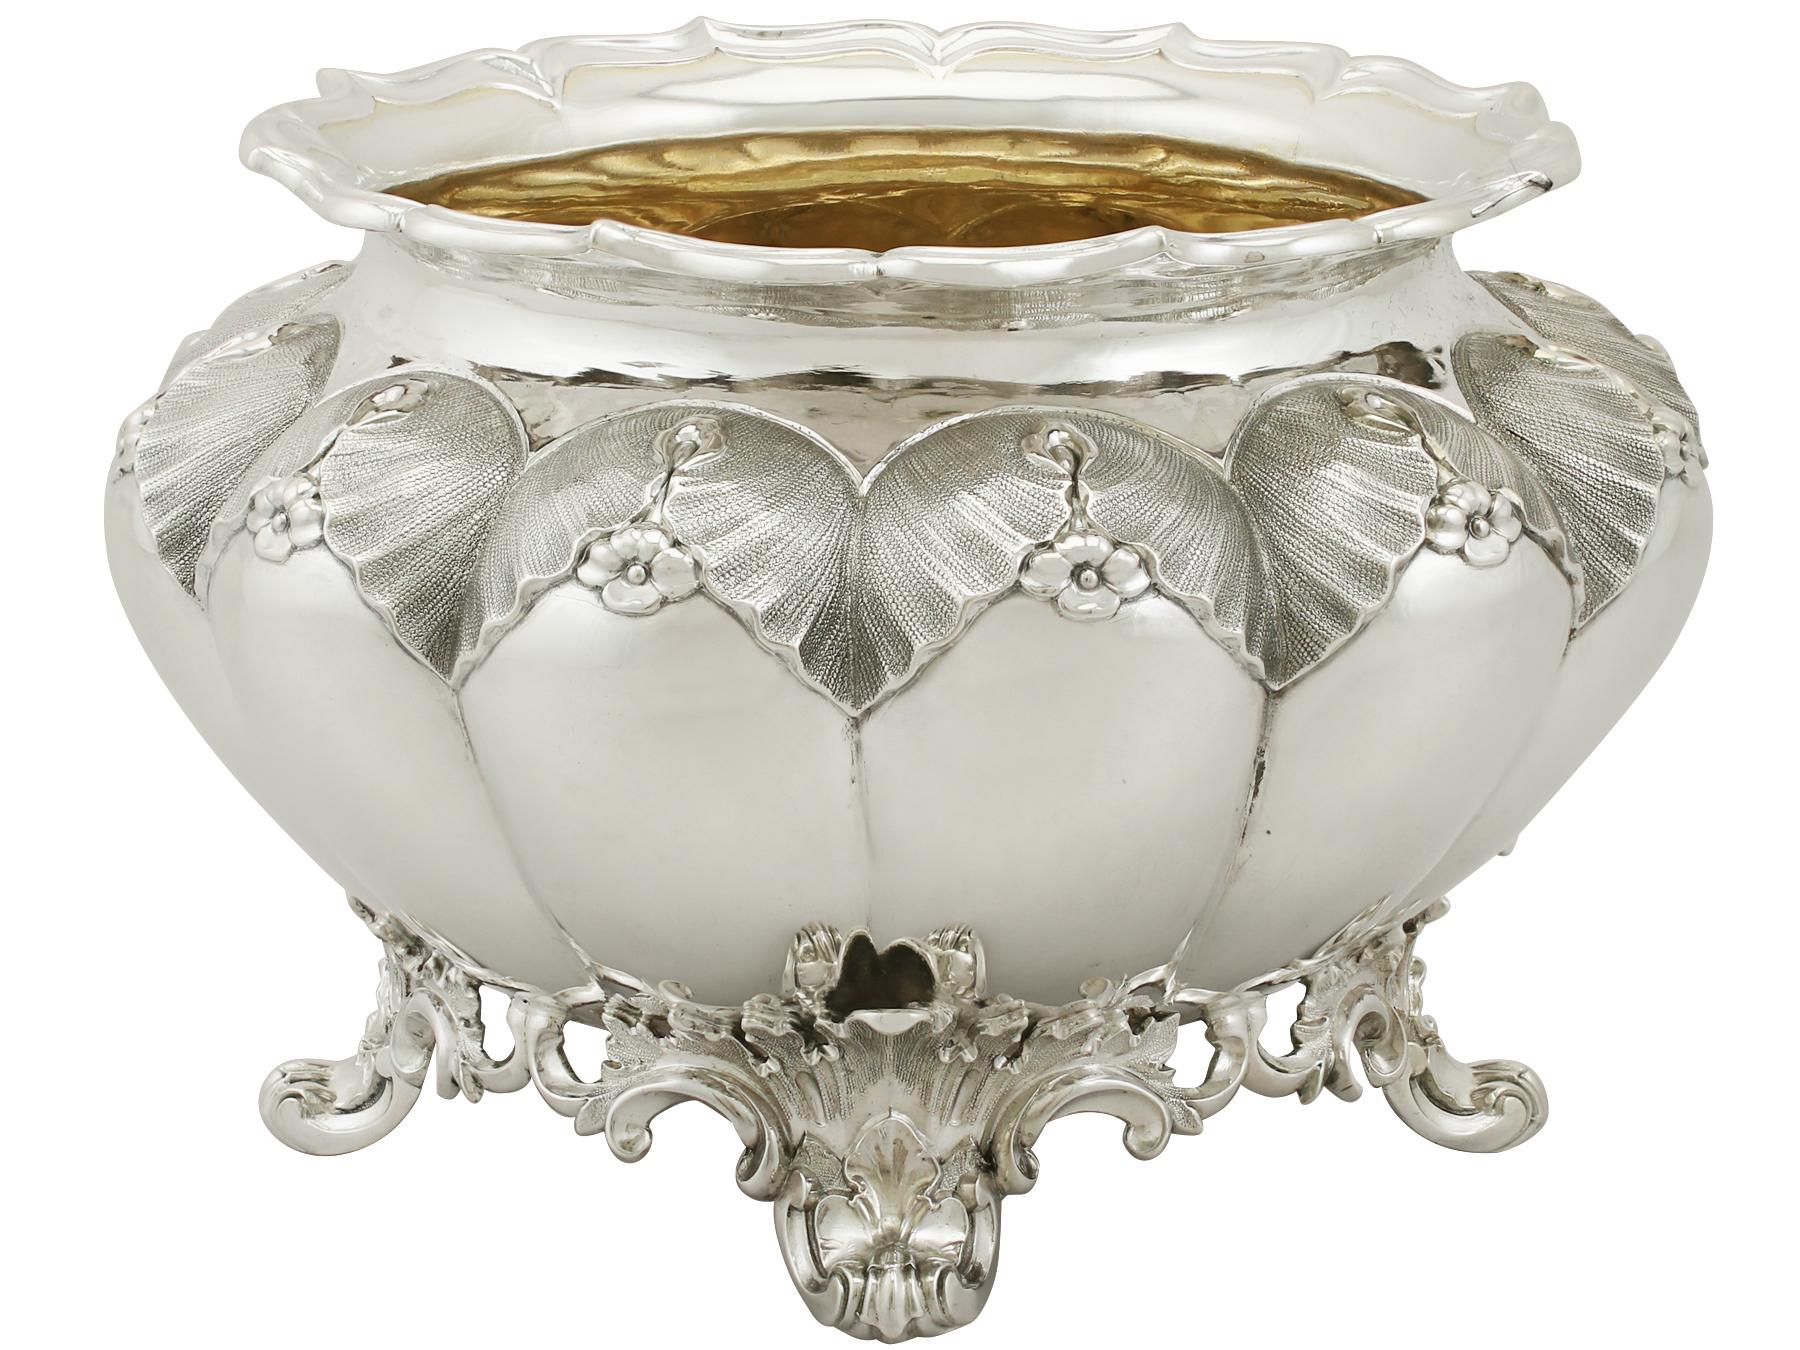 An exceptional, fine and impressive, antique William IV English sterling silver slop bowl; an addition to our silver teaware collection.
This exceptional antique William IV sterling silver slop bowl has circular, lobed form.

The convex paneled